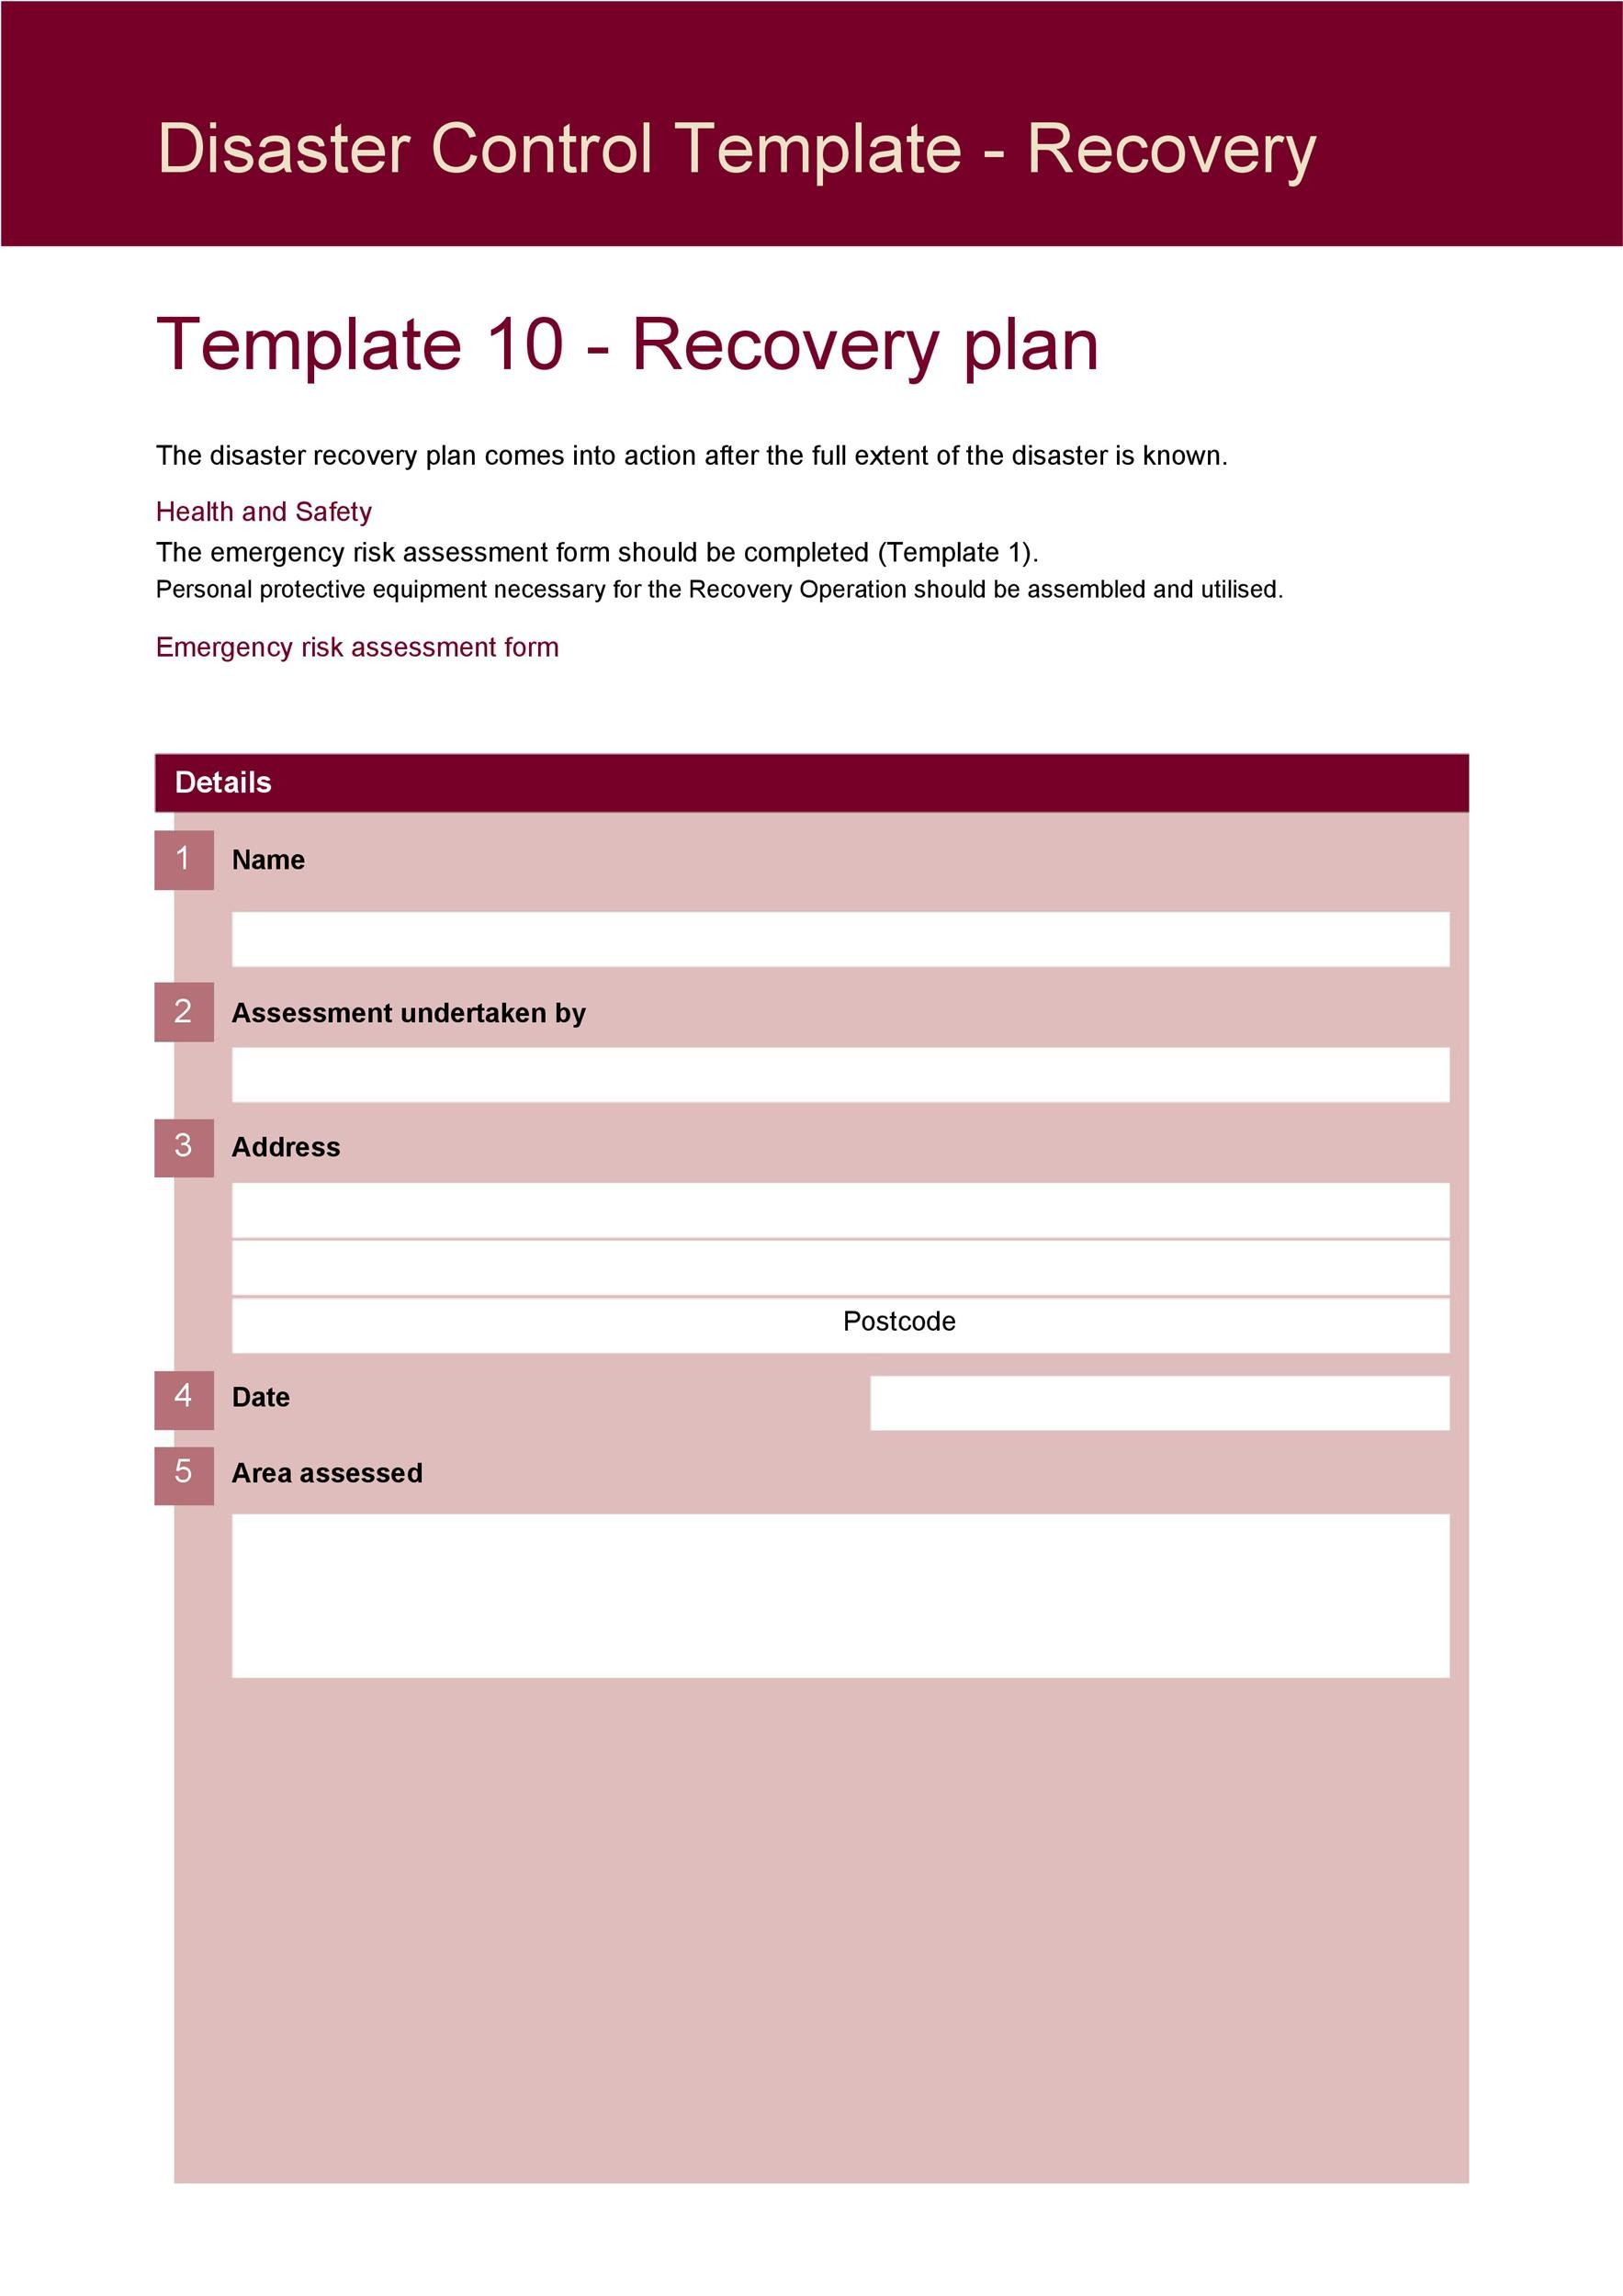 52 Effective Disaster Recovery Plan Templates DRP TemplateLab